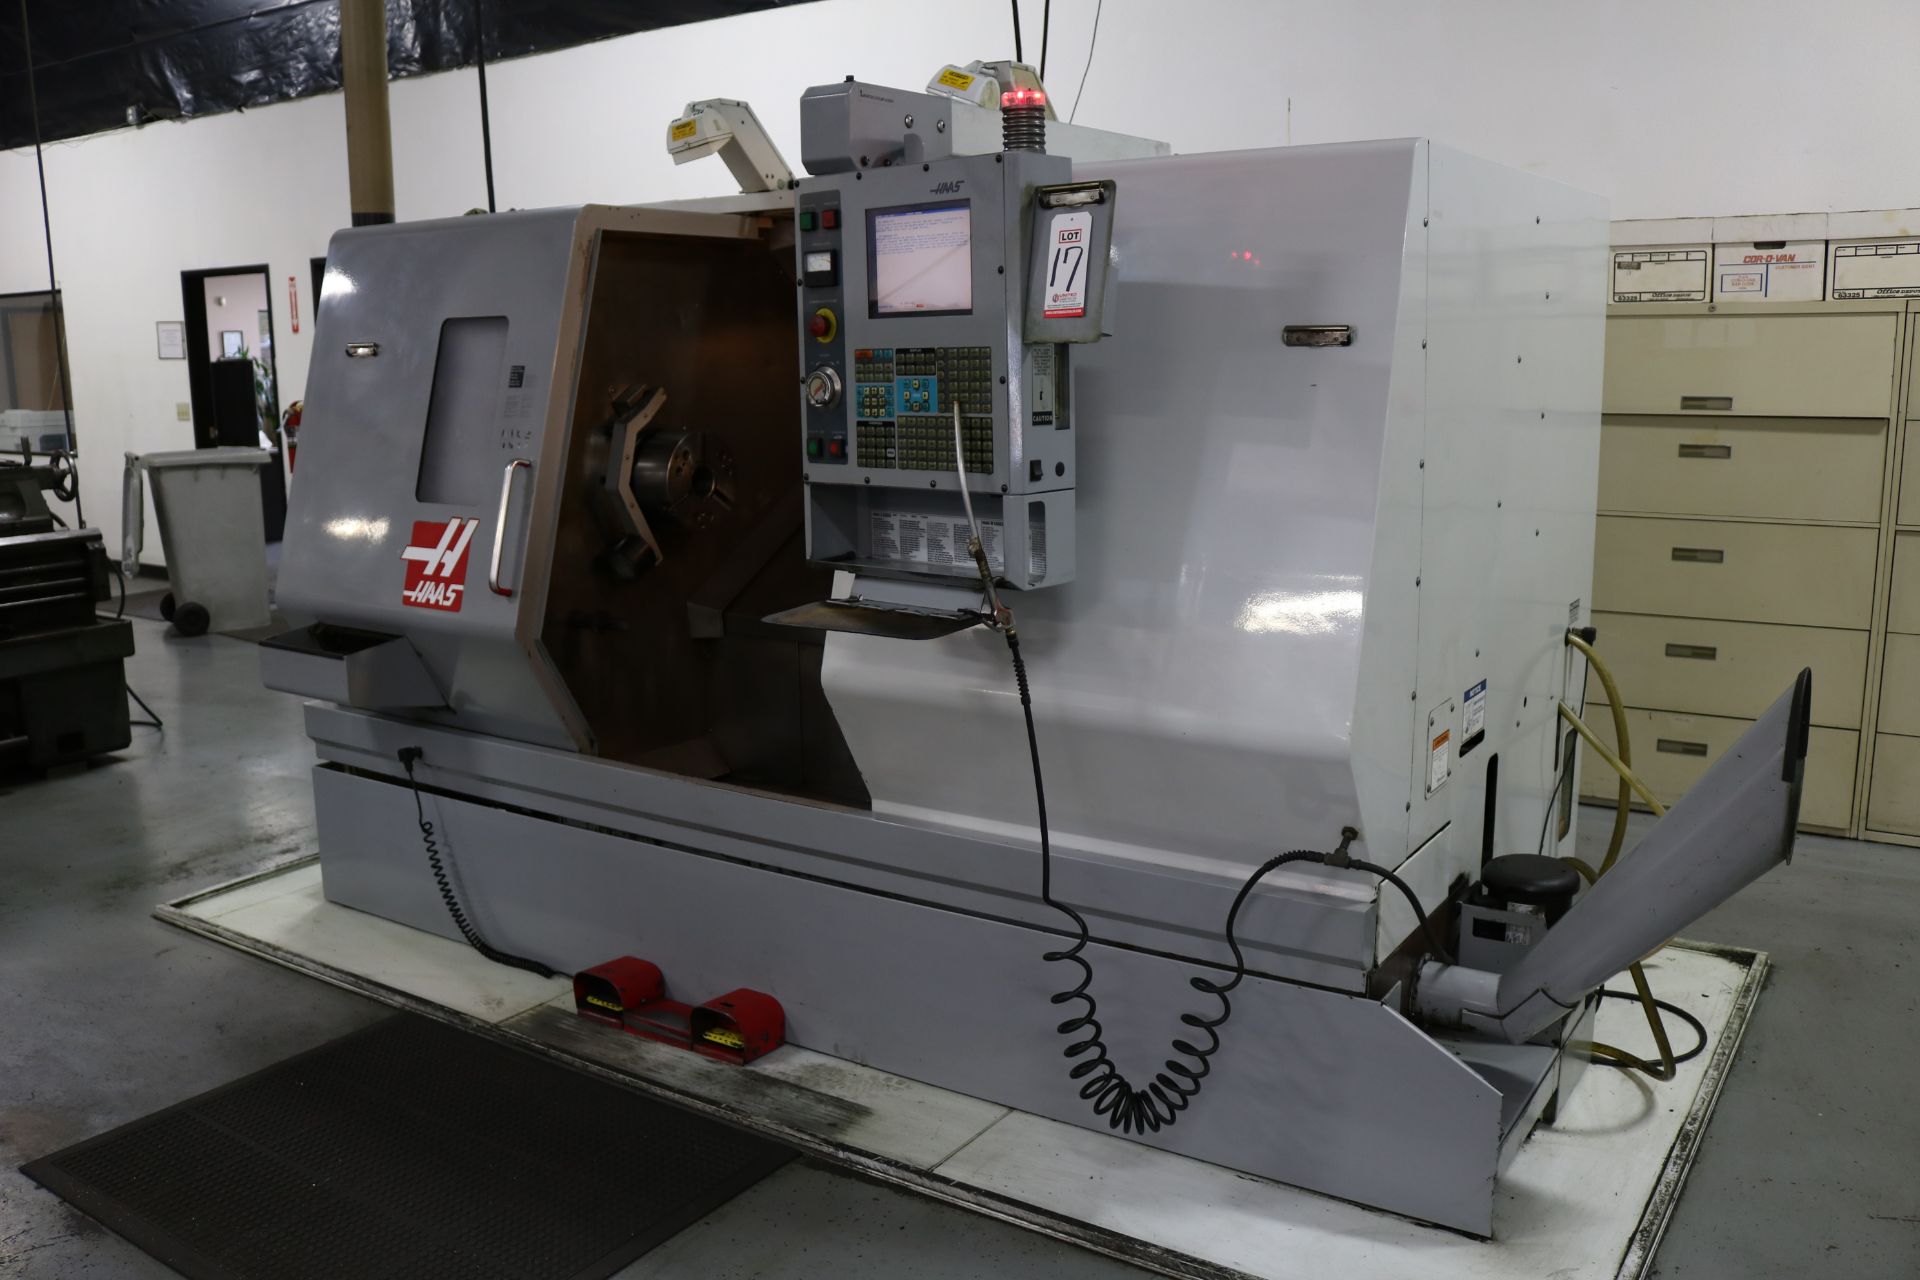 2004 HAAS TL-25 CNC TURNING CENTER, 10" 3 JAW CHUCK, 30" SWING, 14.5" SWING OVER CROSS SLIDE, 4" BAR - Image 3 of 13